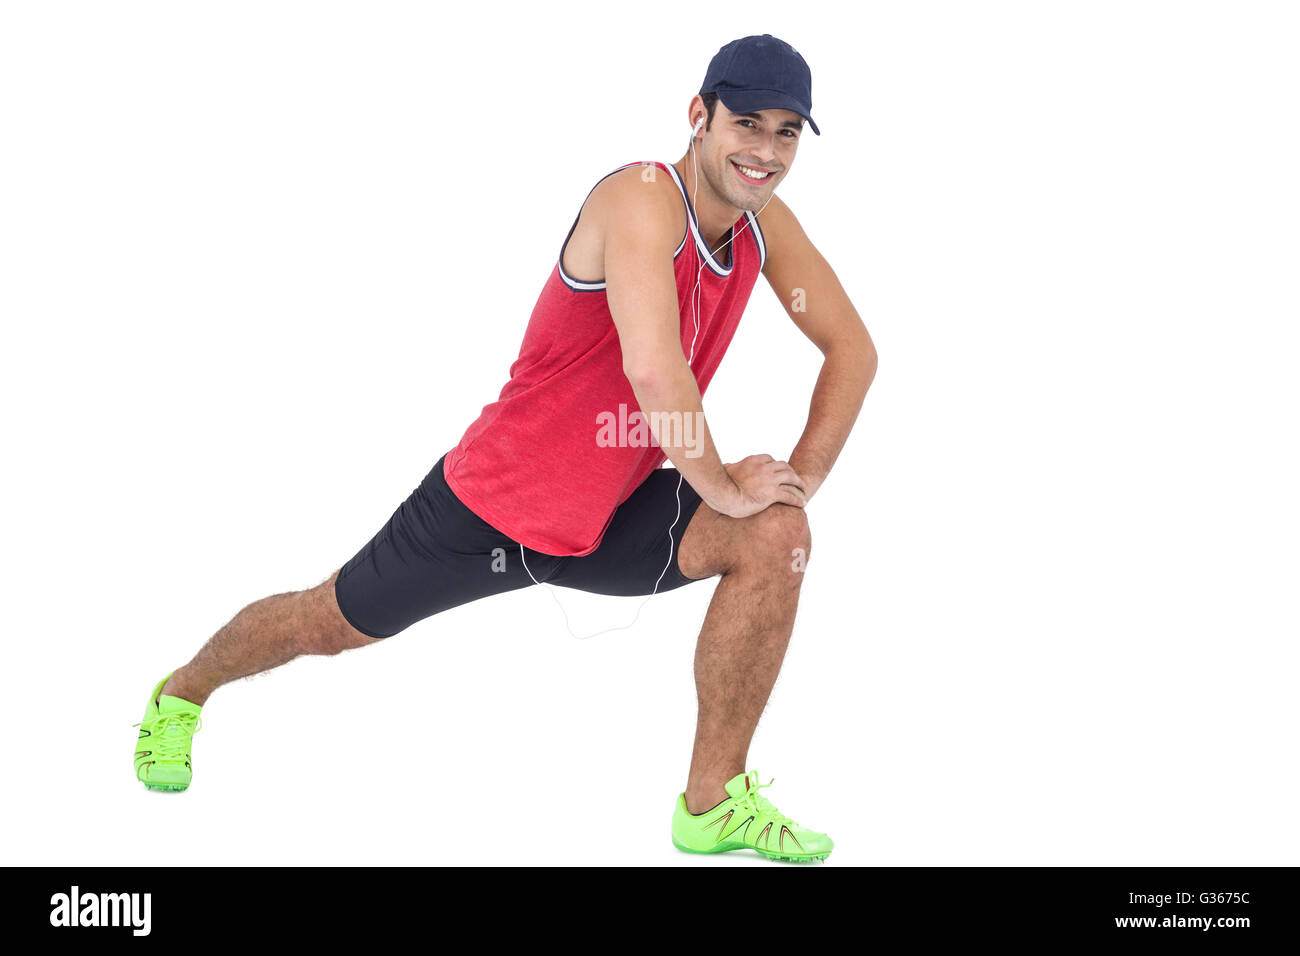 Portrait of male athlete doing stretching exercise Stock Photo